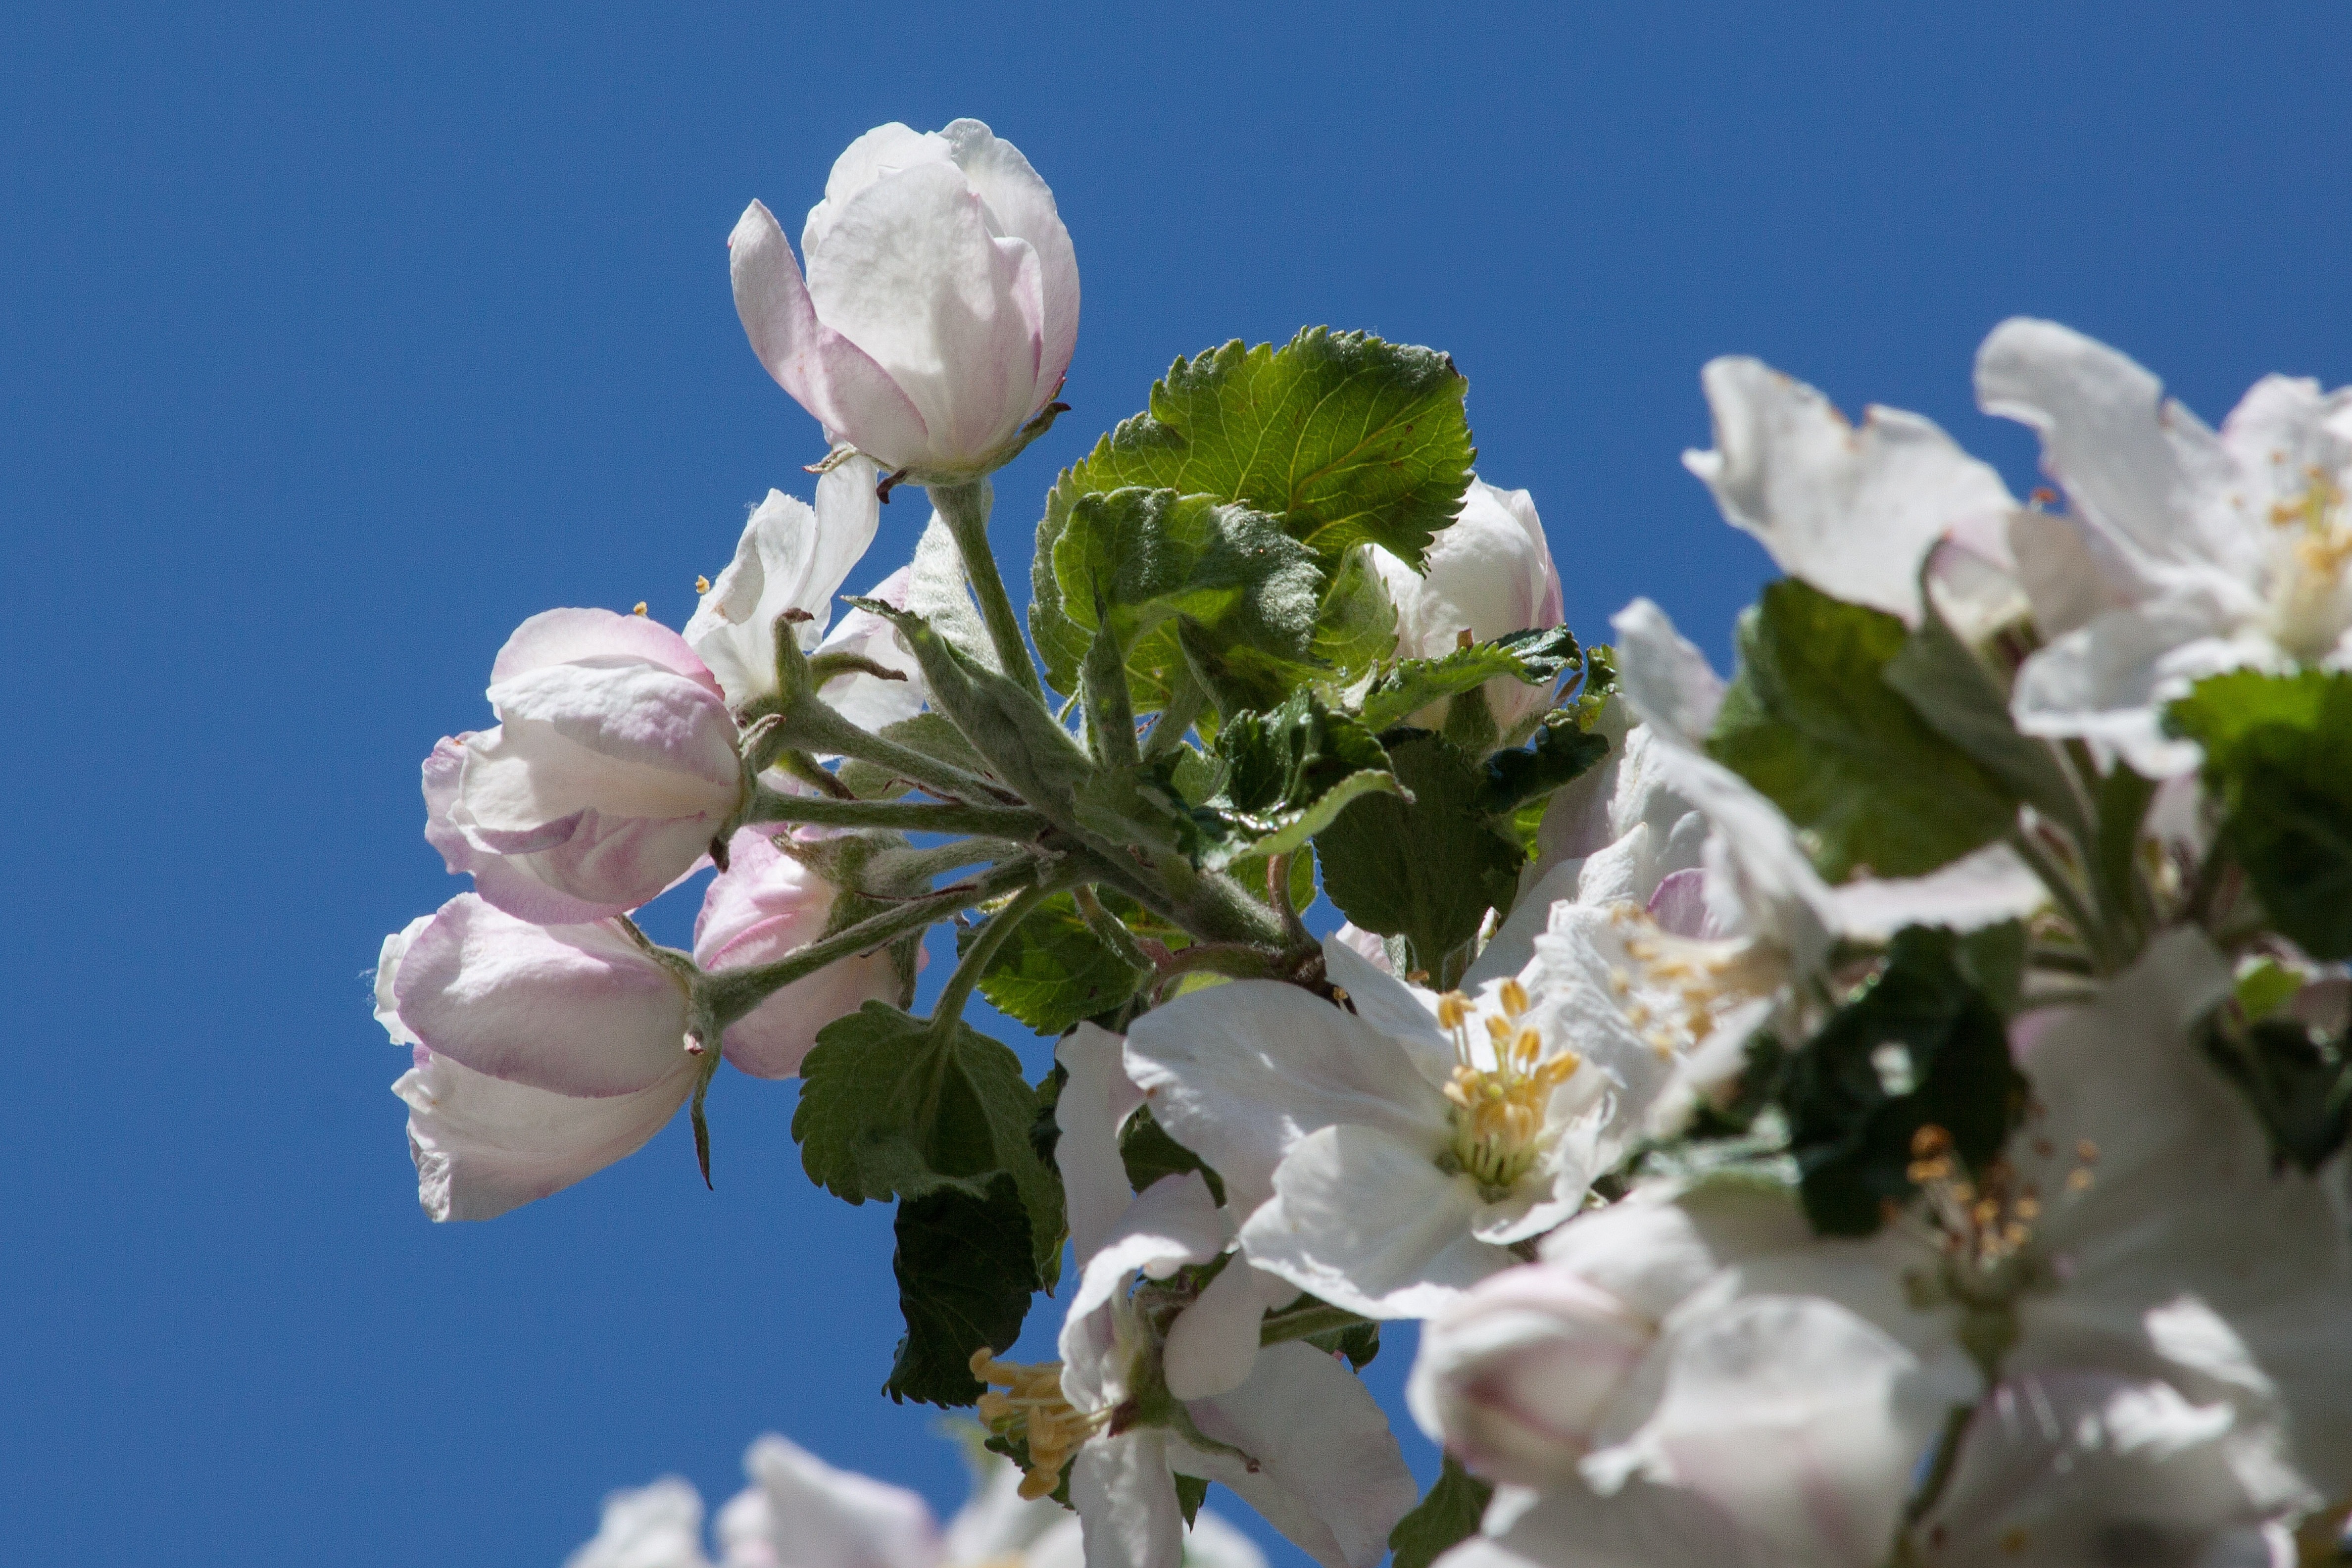 white-and-pink cherry blossom flower over blue sky